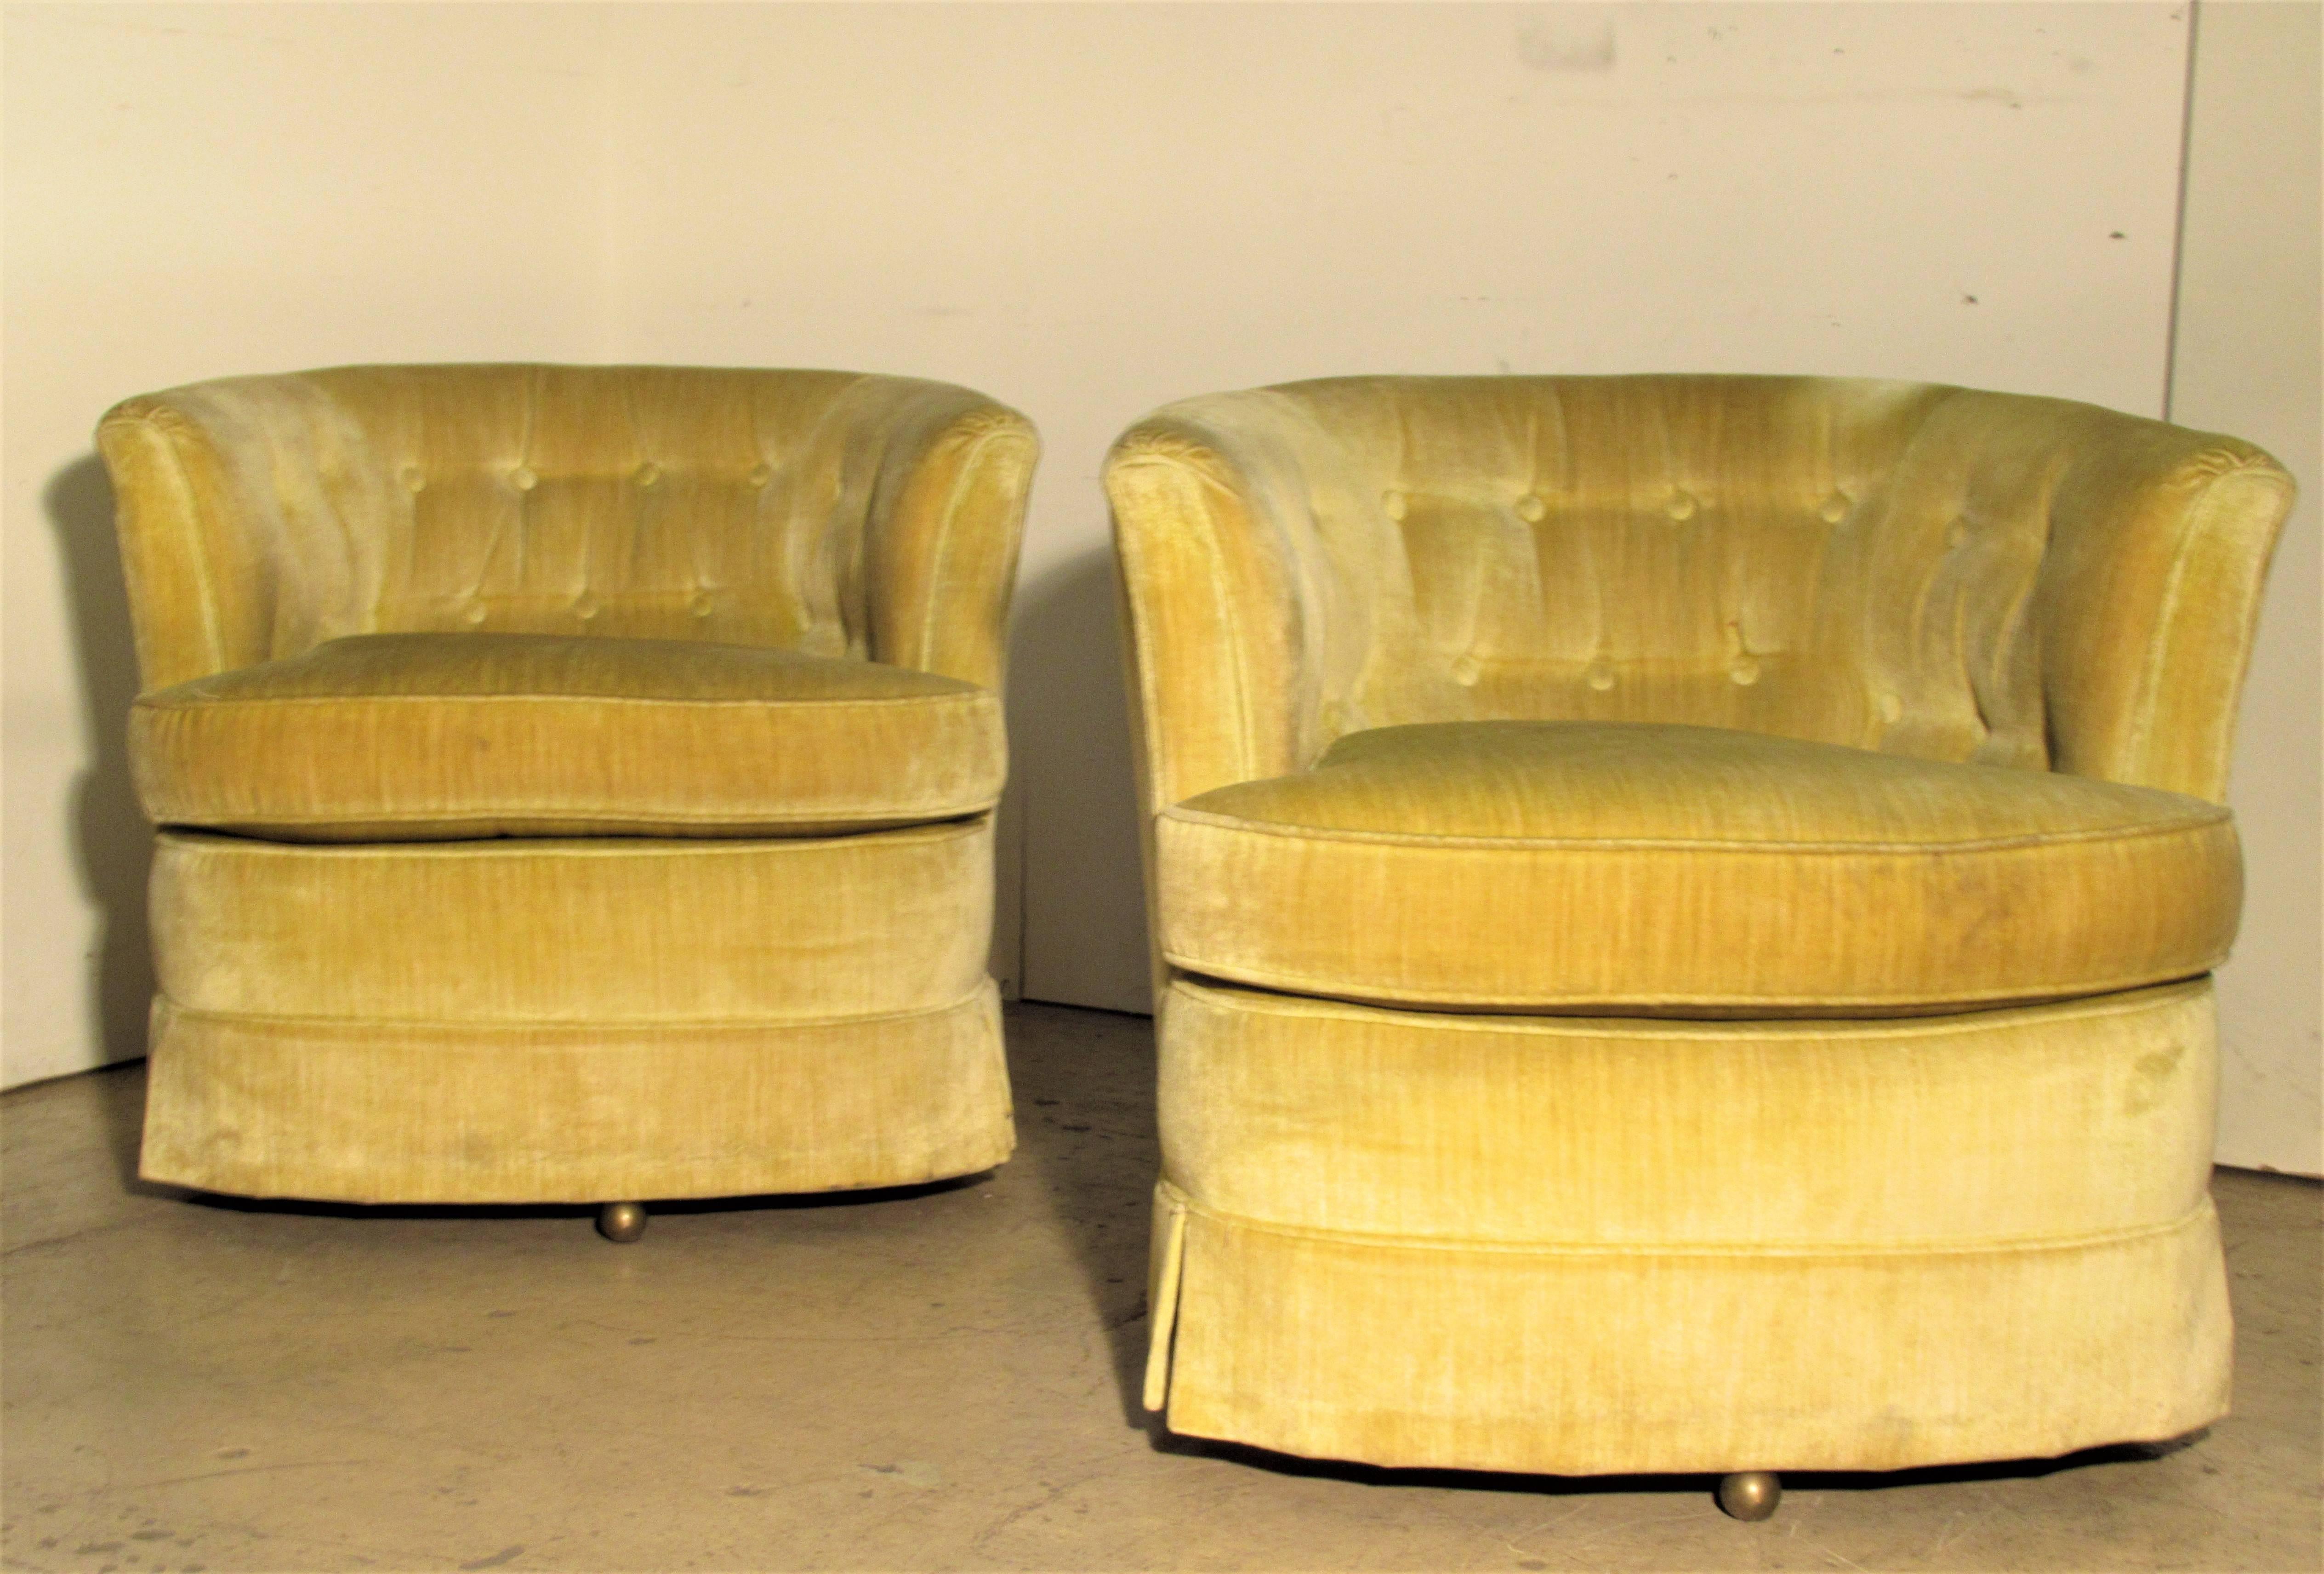 A very good looking pair of mid-20th century modern swivel barrel chairs by Drexel in the style of Milo Baughman with the original button tufted pale lemon chartreuse upholstery - circa 1960s. Look at all pictures and read condition report in